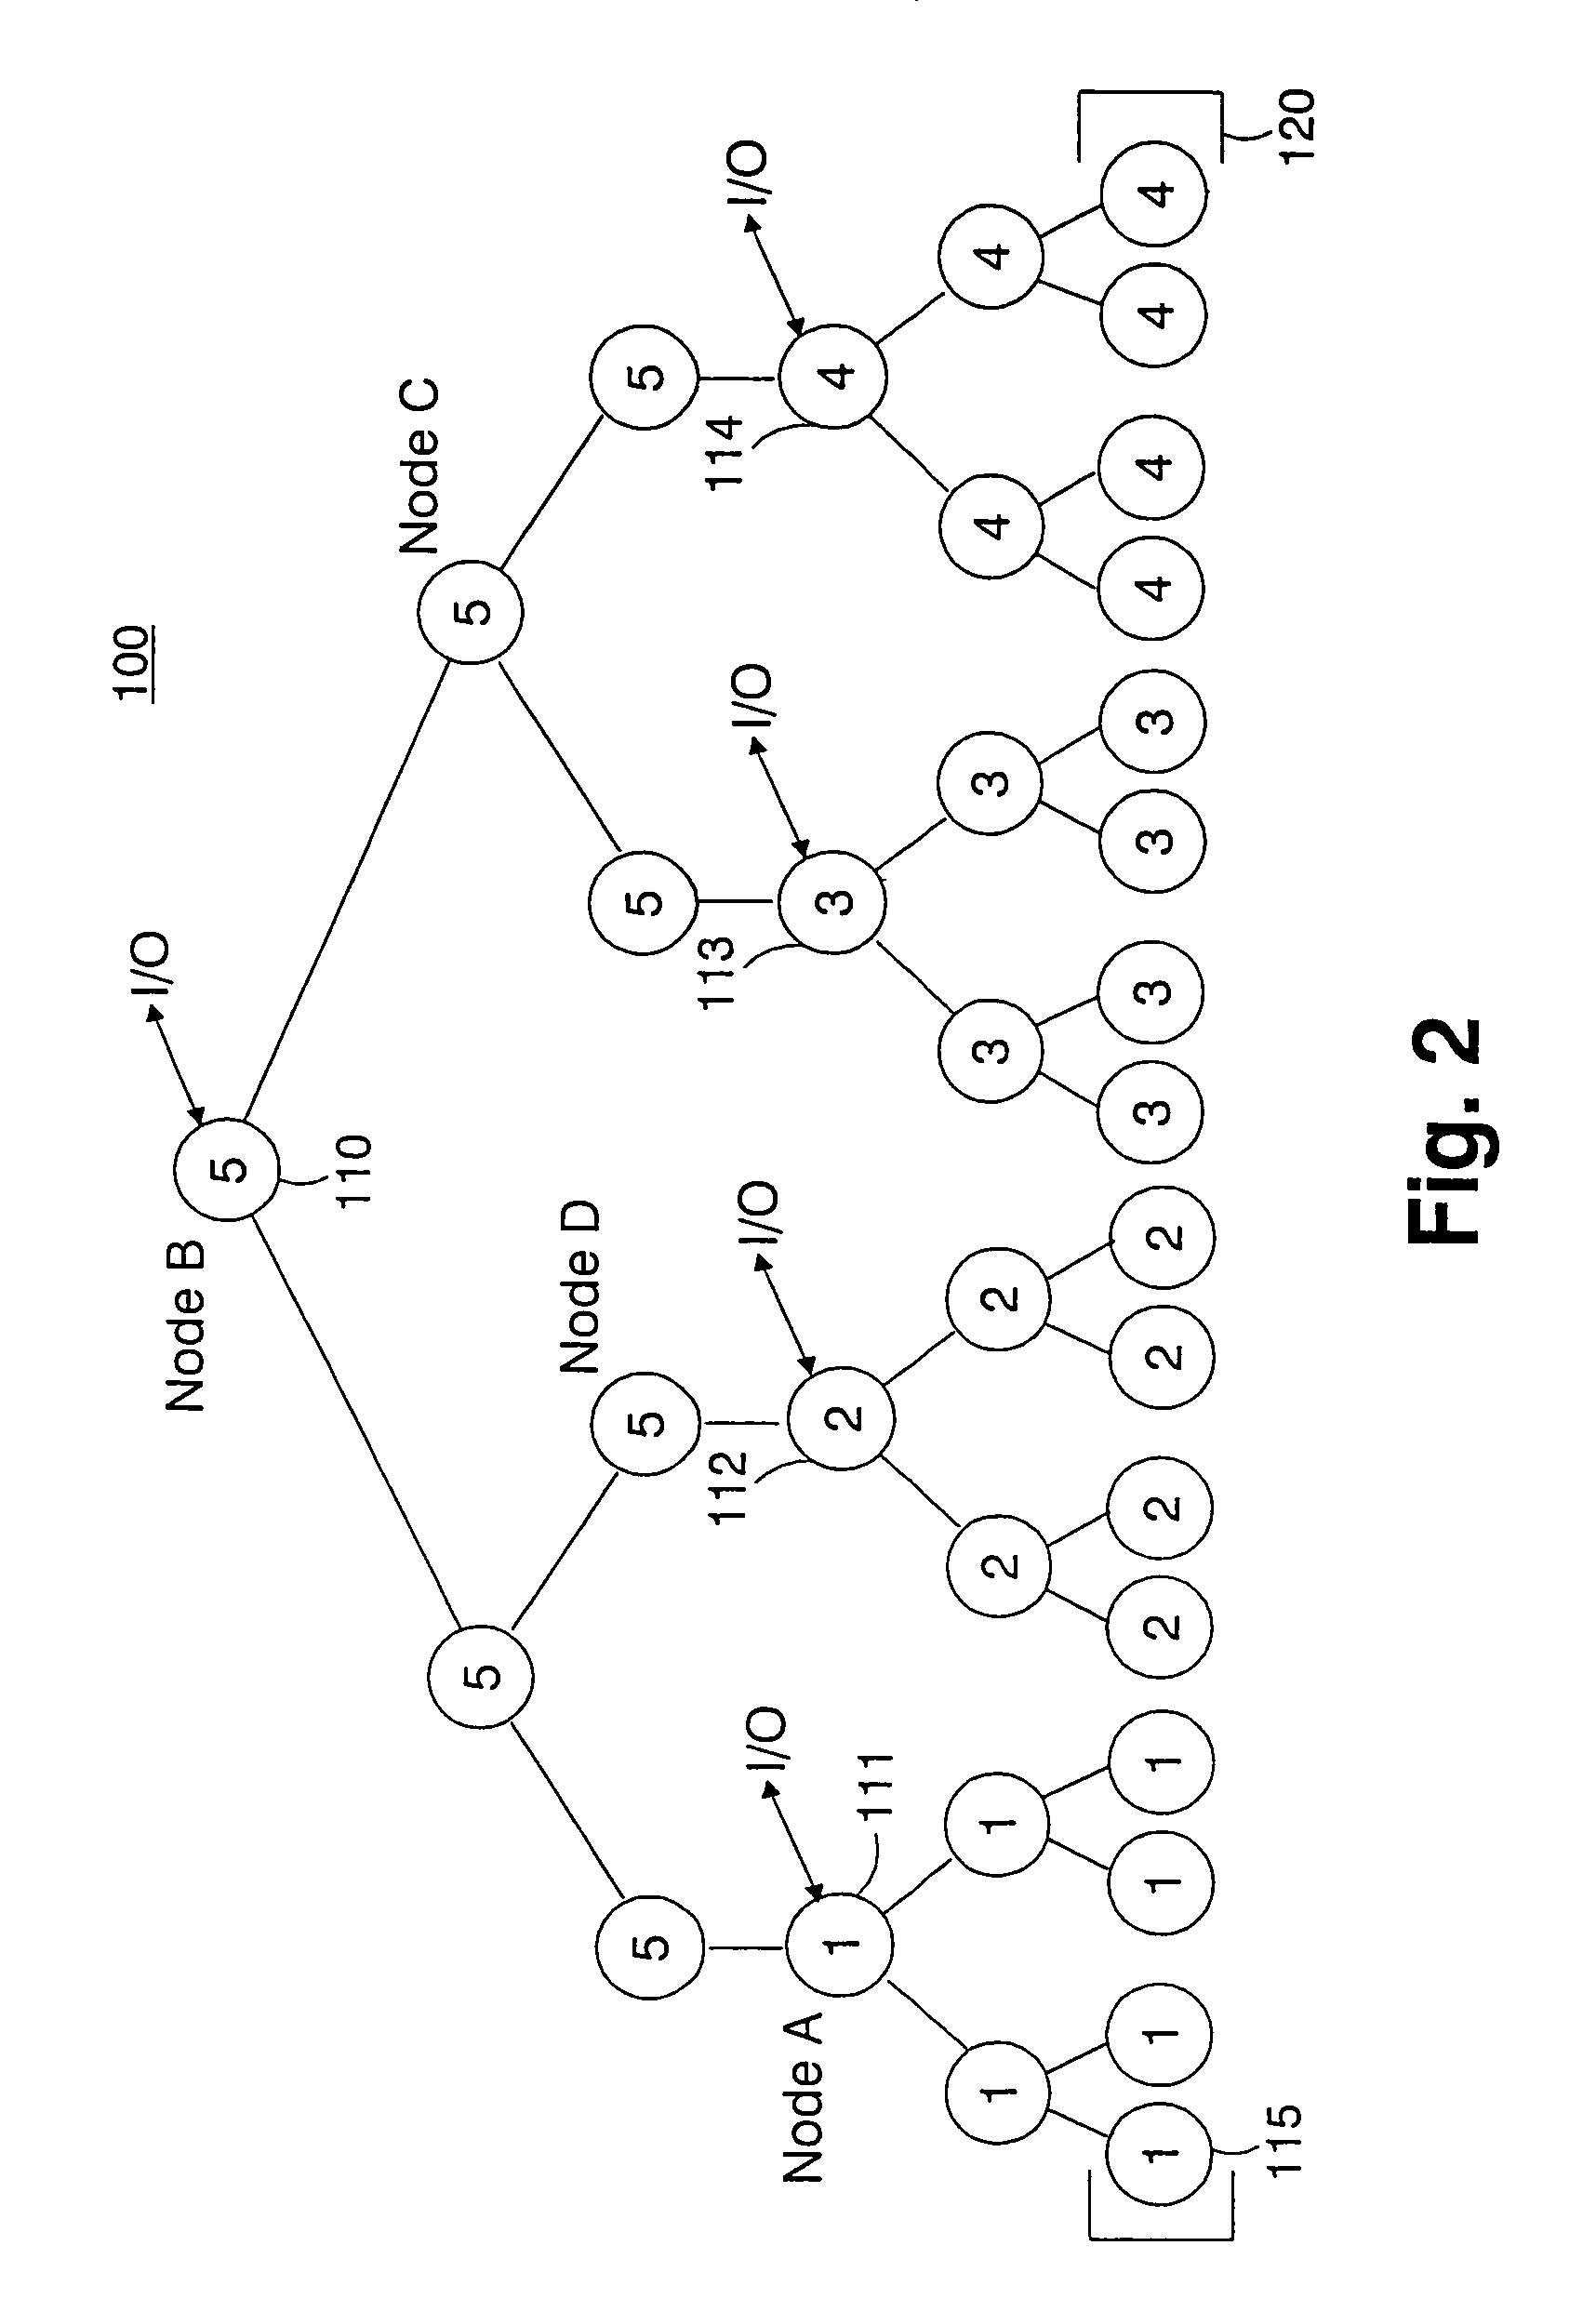 Global tree network for computing structures enabling global processing operations